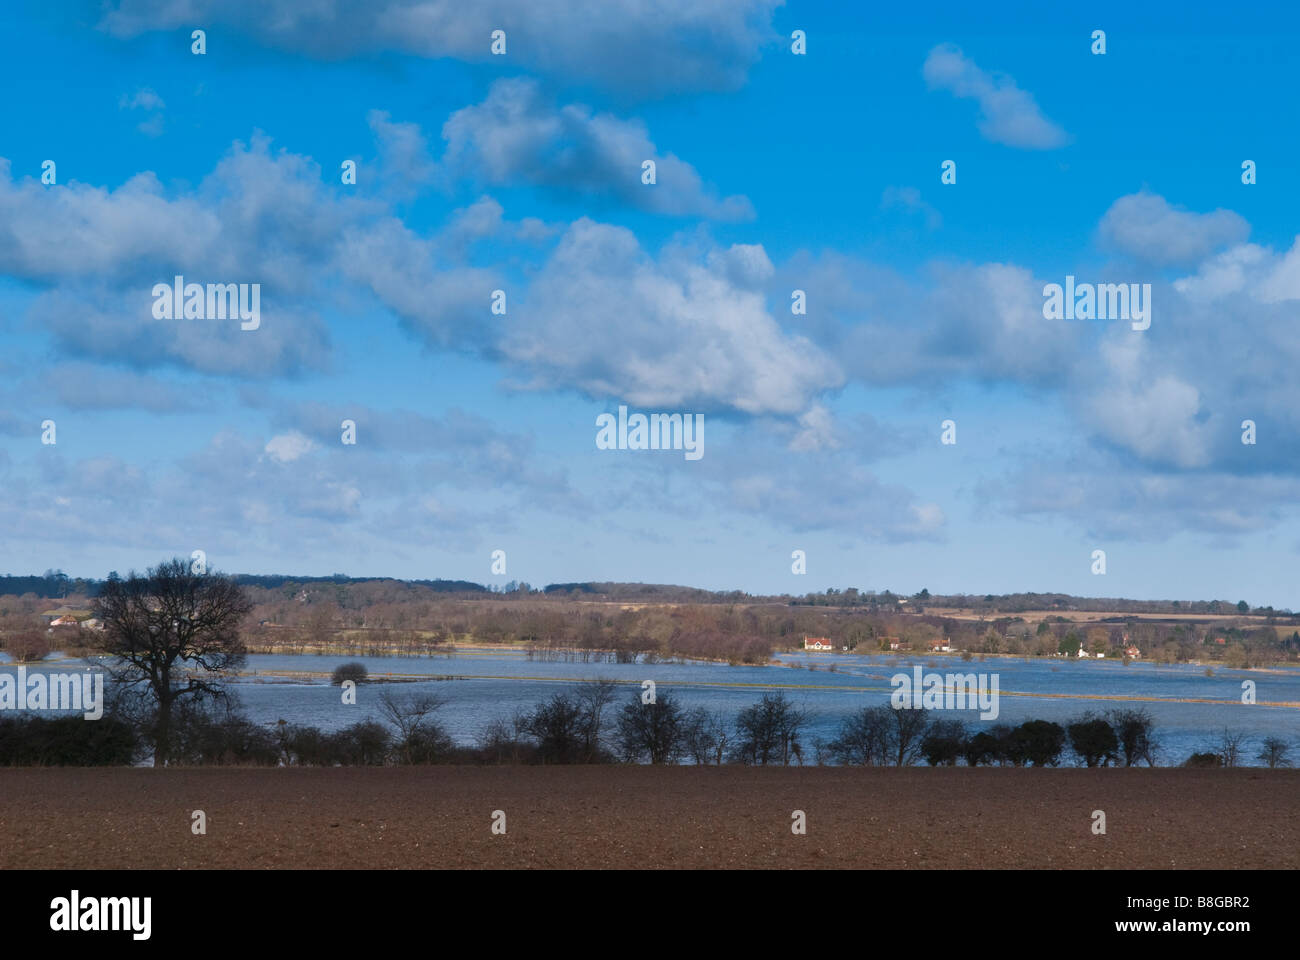 A view of the floods looking towards Mettingham,taken from Shipmeadow,Suffolk,Uk Stock Photo